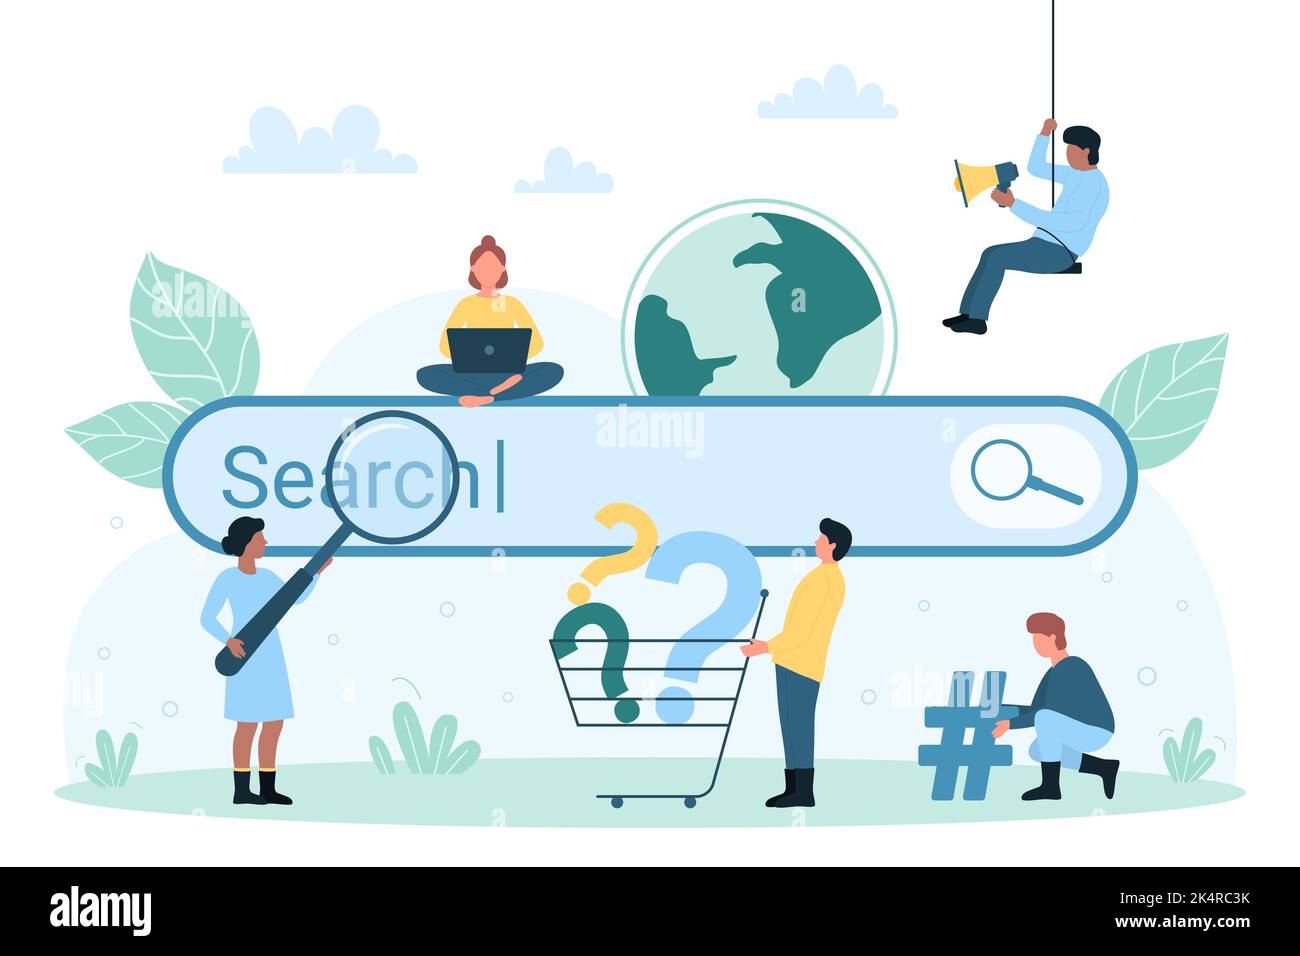 Online web search service vector illustration. Cartoon tiny people look through magnifying glass to explore internet, millennial characters use browser search engine to find answers to questions Stock Vector